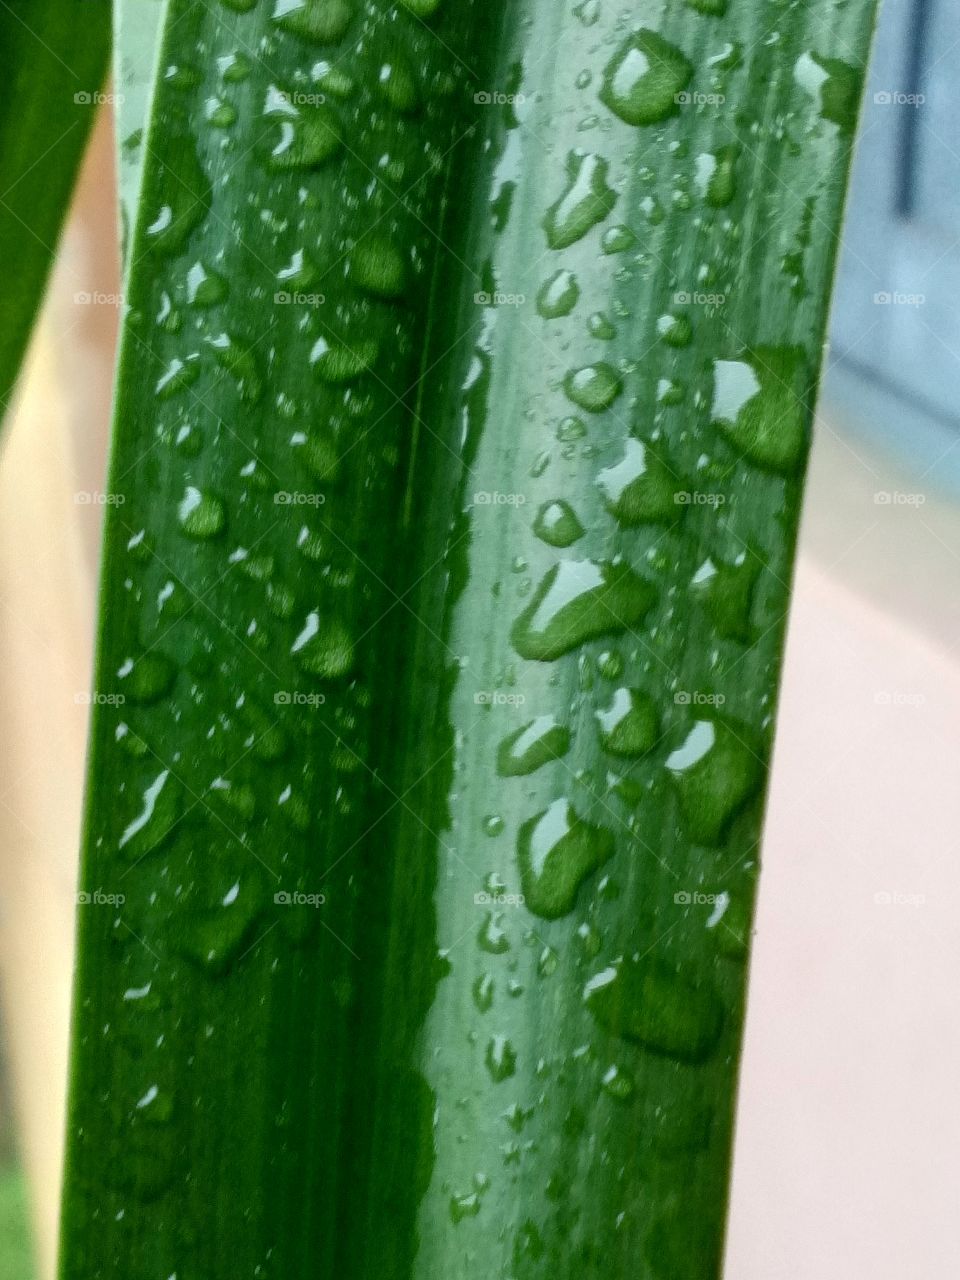 Title- Call of the green
Description- Rain drops on a green leaf.
Location- West Bengal,India